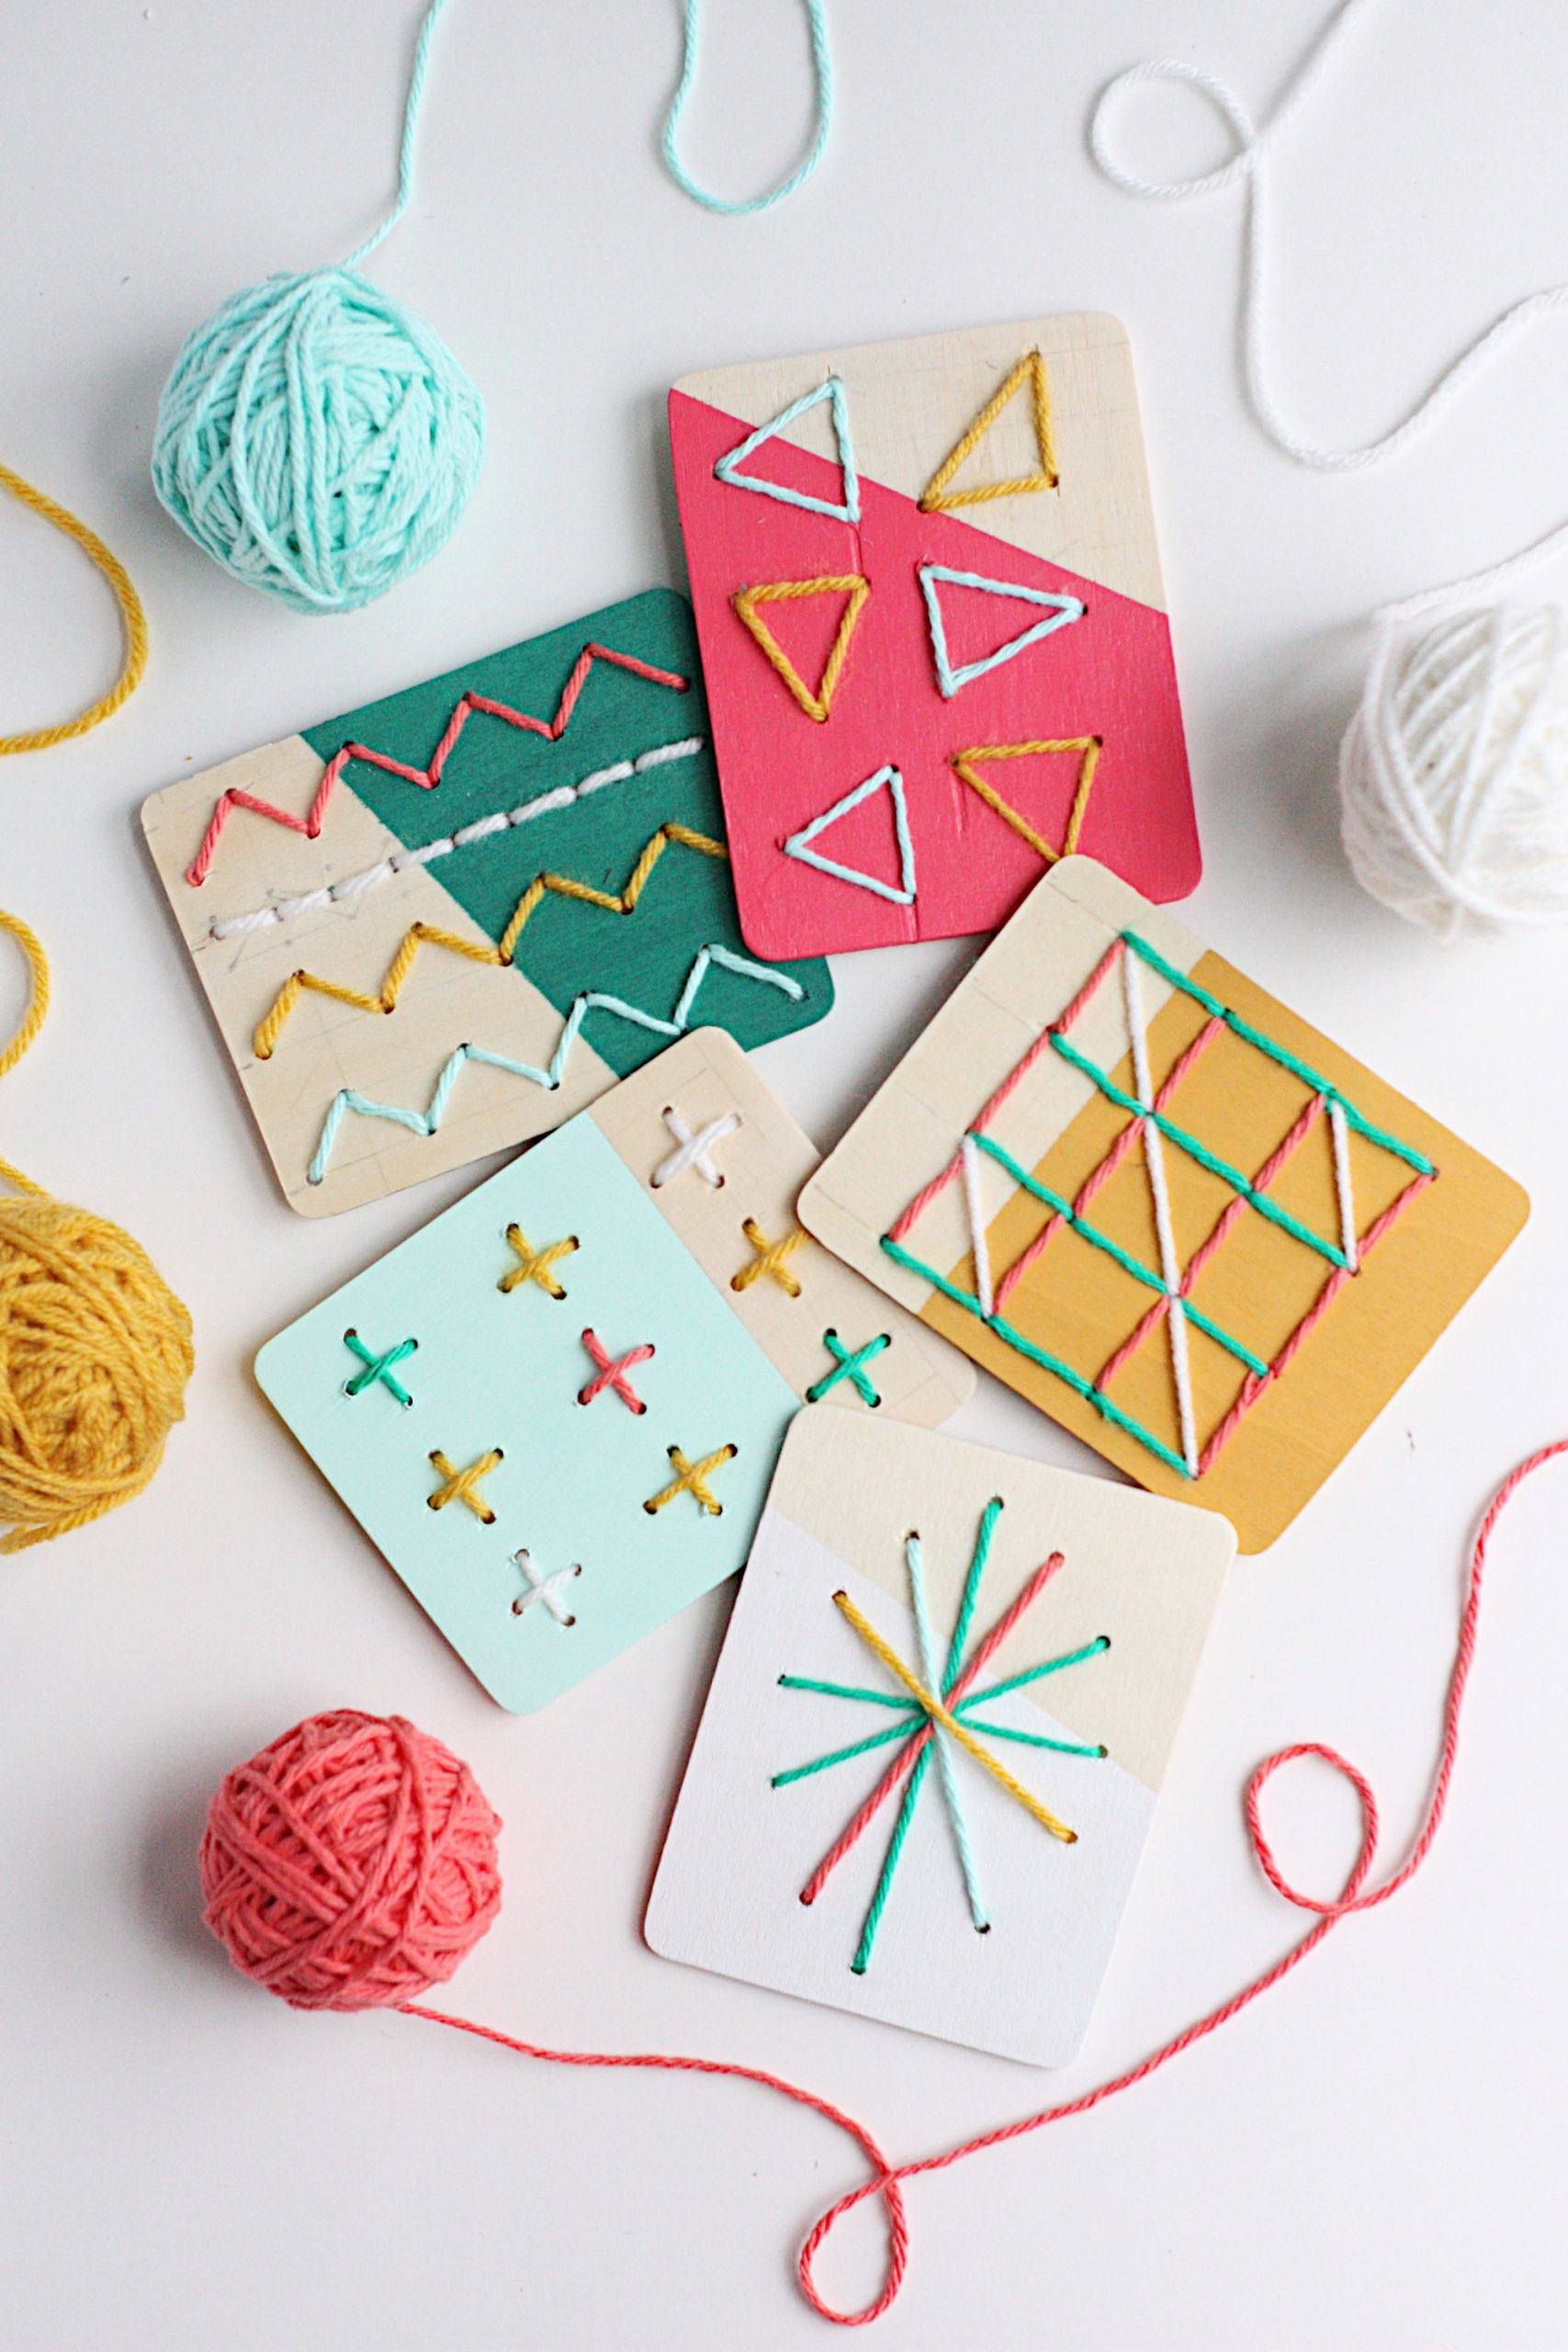 DIY Projects For Toddlers
 11 DIY Yarn Crafts That Will Amaze Your Kids Shelterness